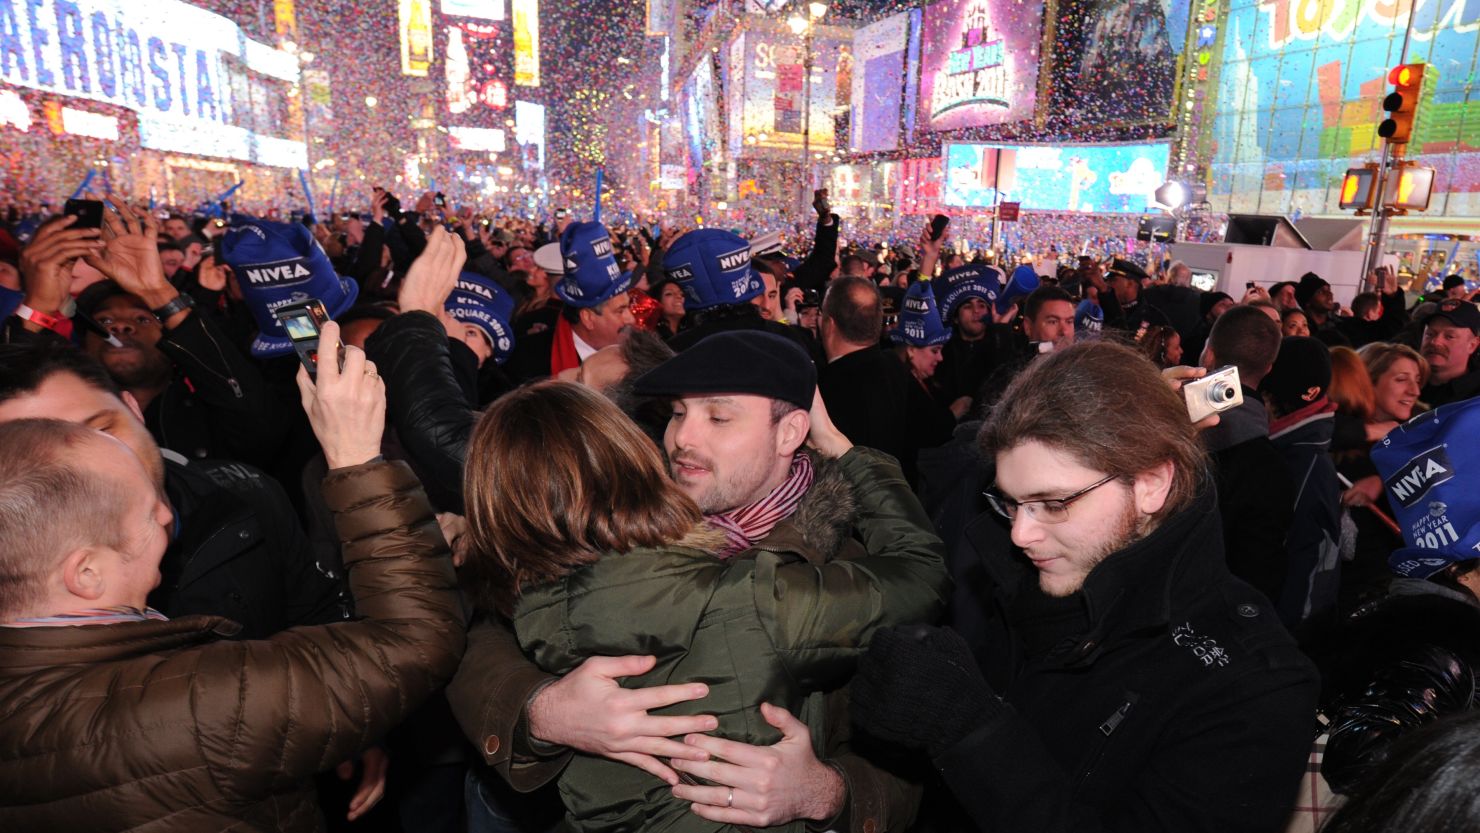 Revelers in Times Square had high hopes for 2011, but comedians wound up lamenting some missed opportunities, says Dean Obeidallah.